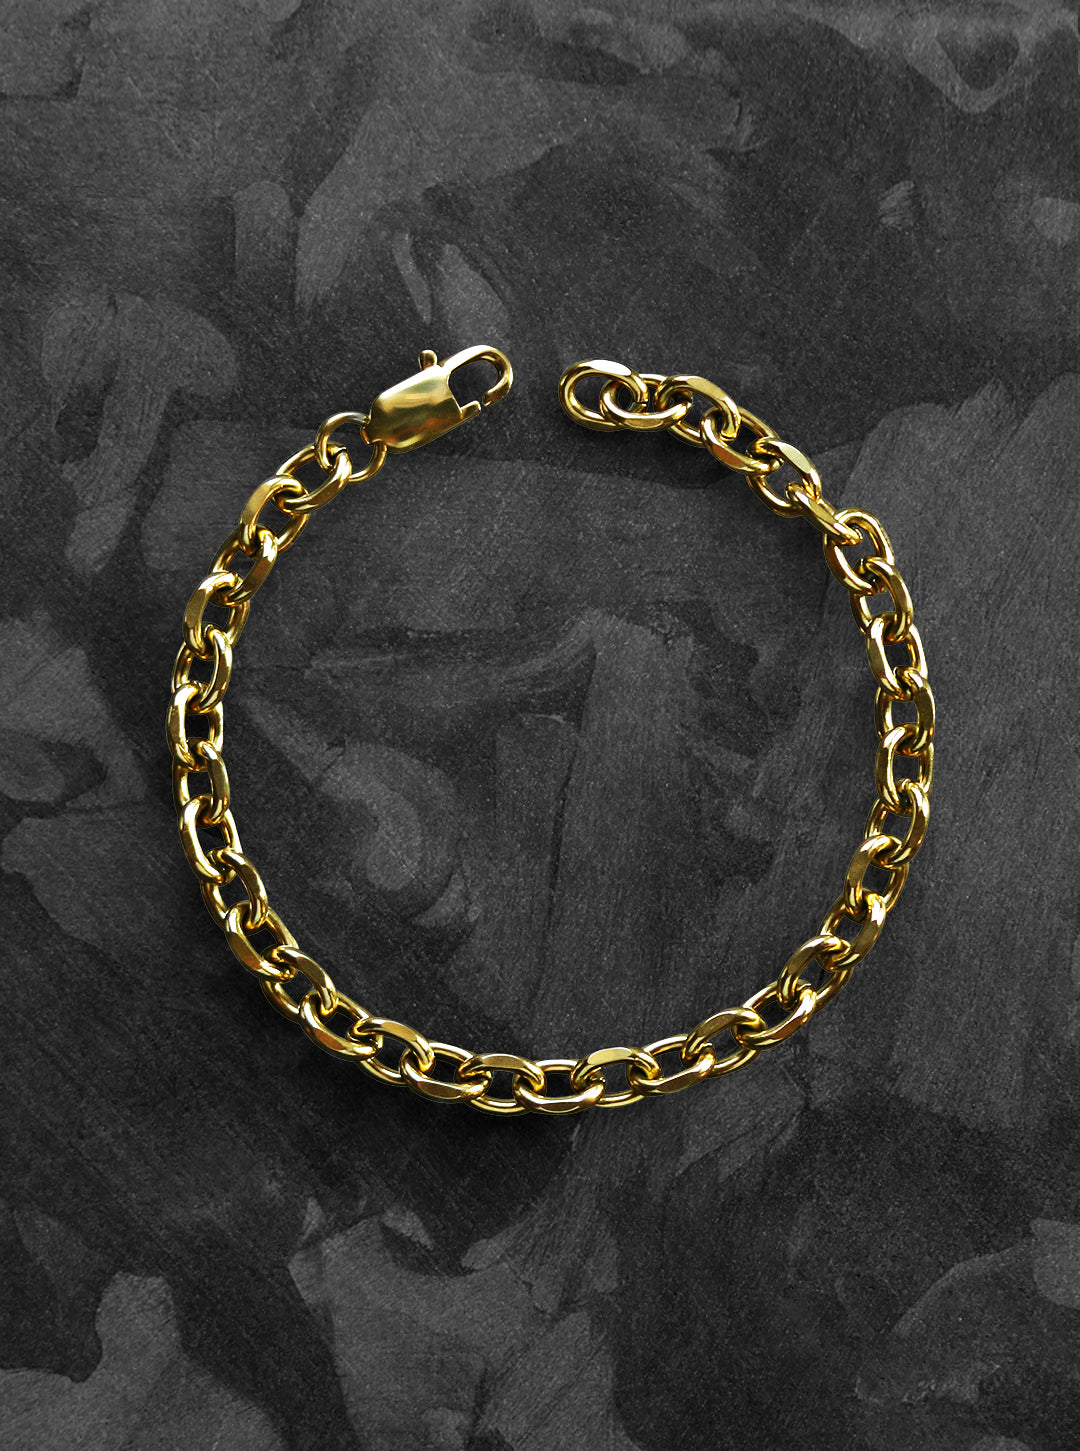 men's minimalist chain bracelet that is both modern and classic in gold tone